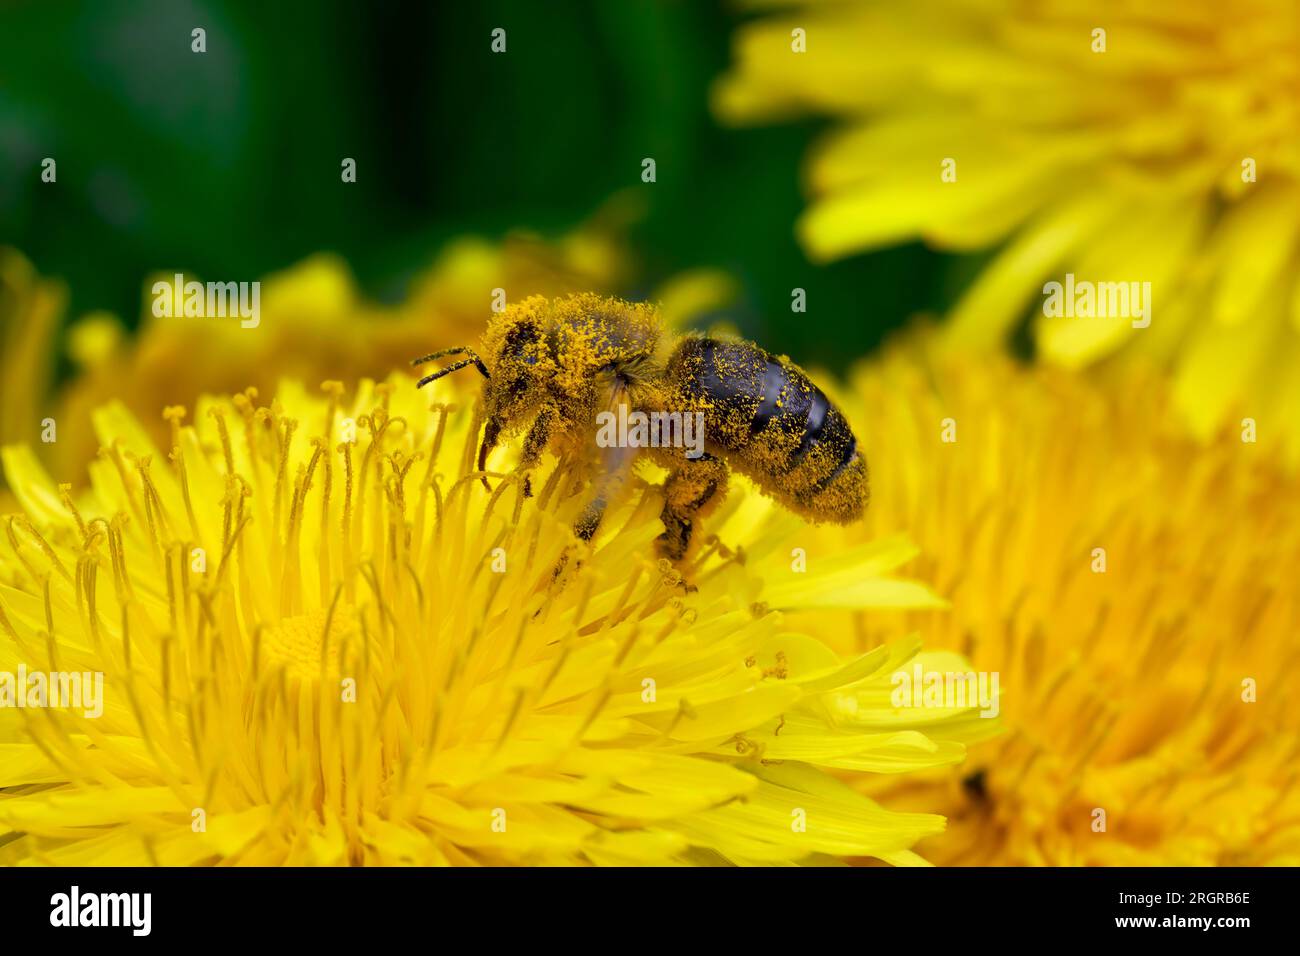 Bee covered with yellow pollen on a dandelion flower Stock Photo